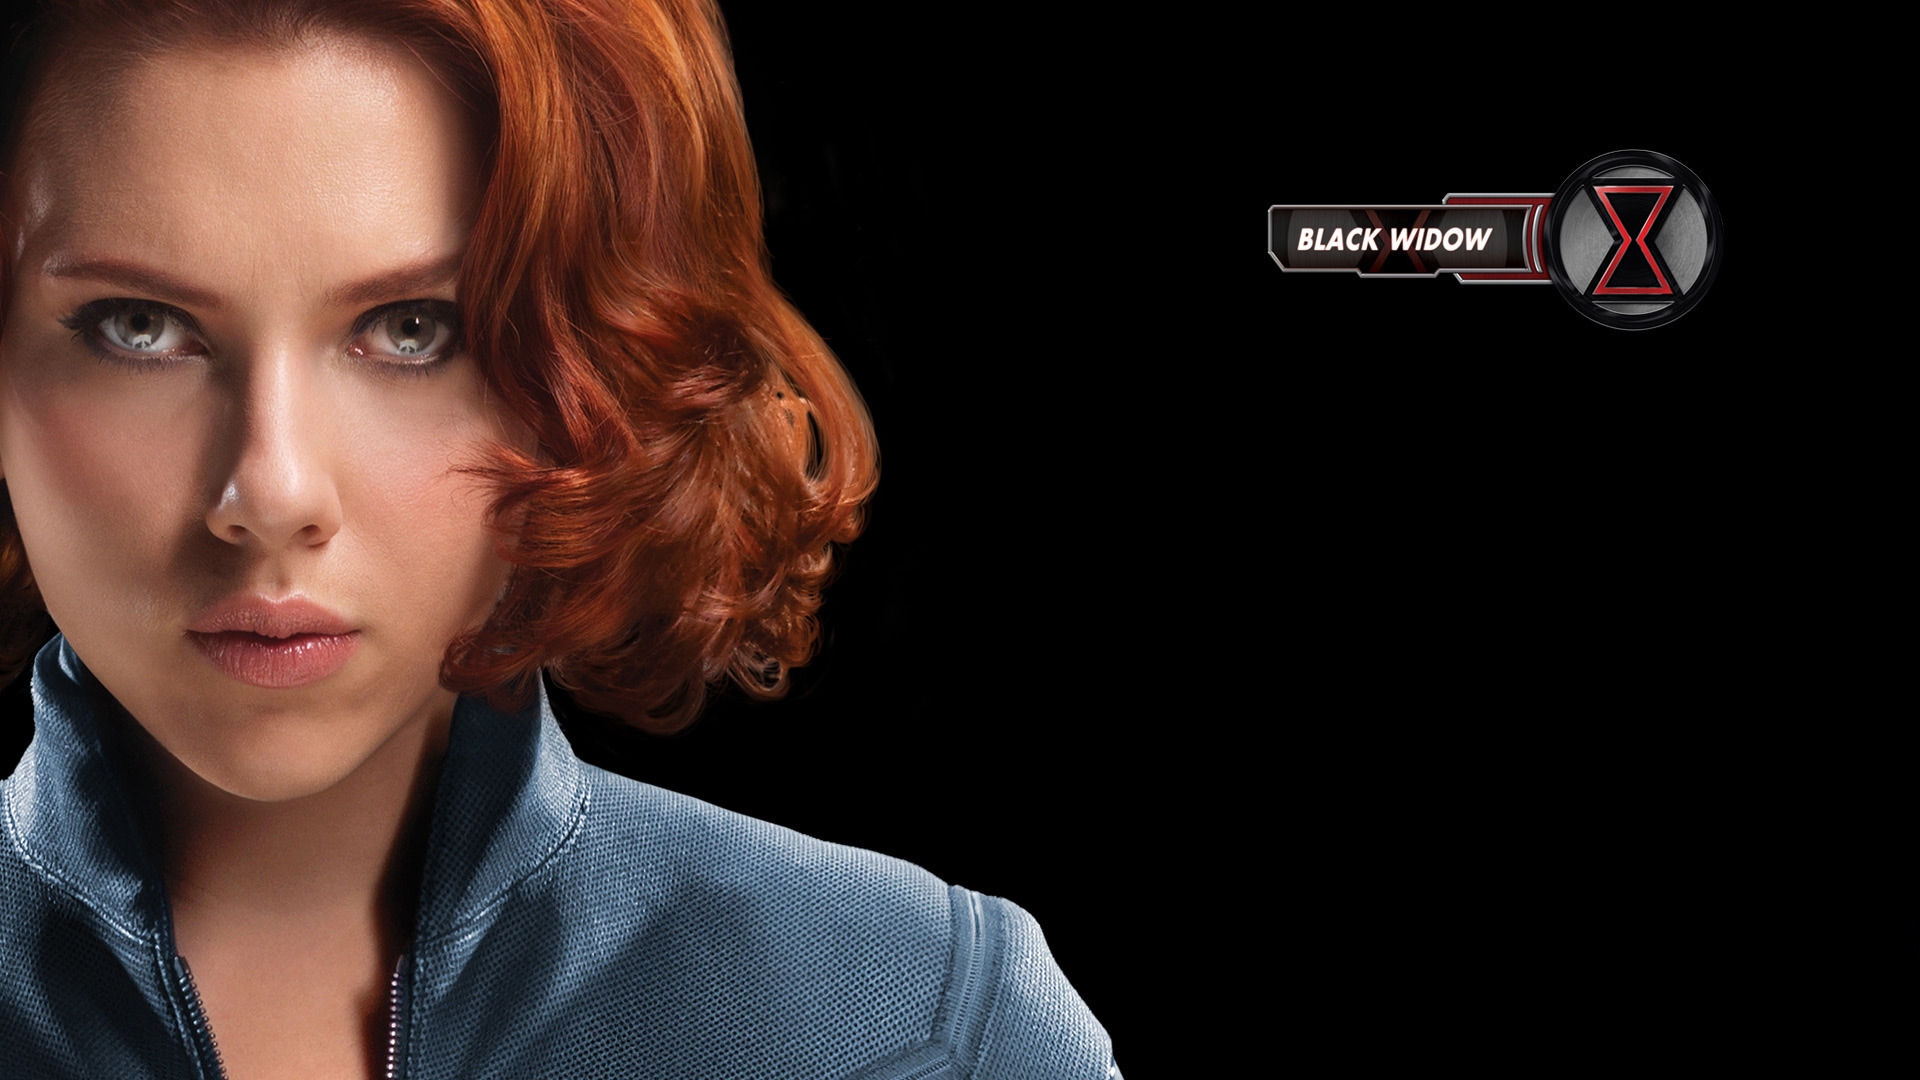 The Avengers Black Widow for 1920 x 1080 HDTV 1080p resolution